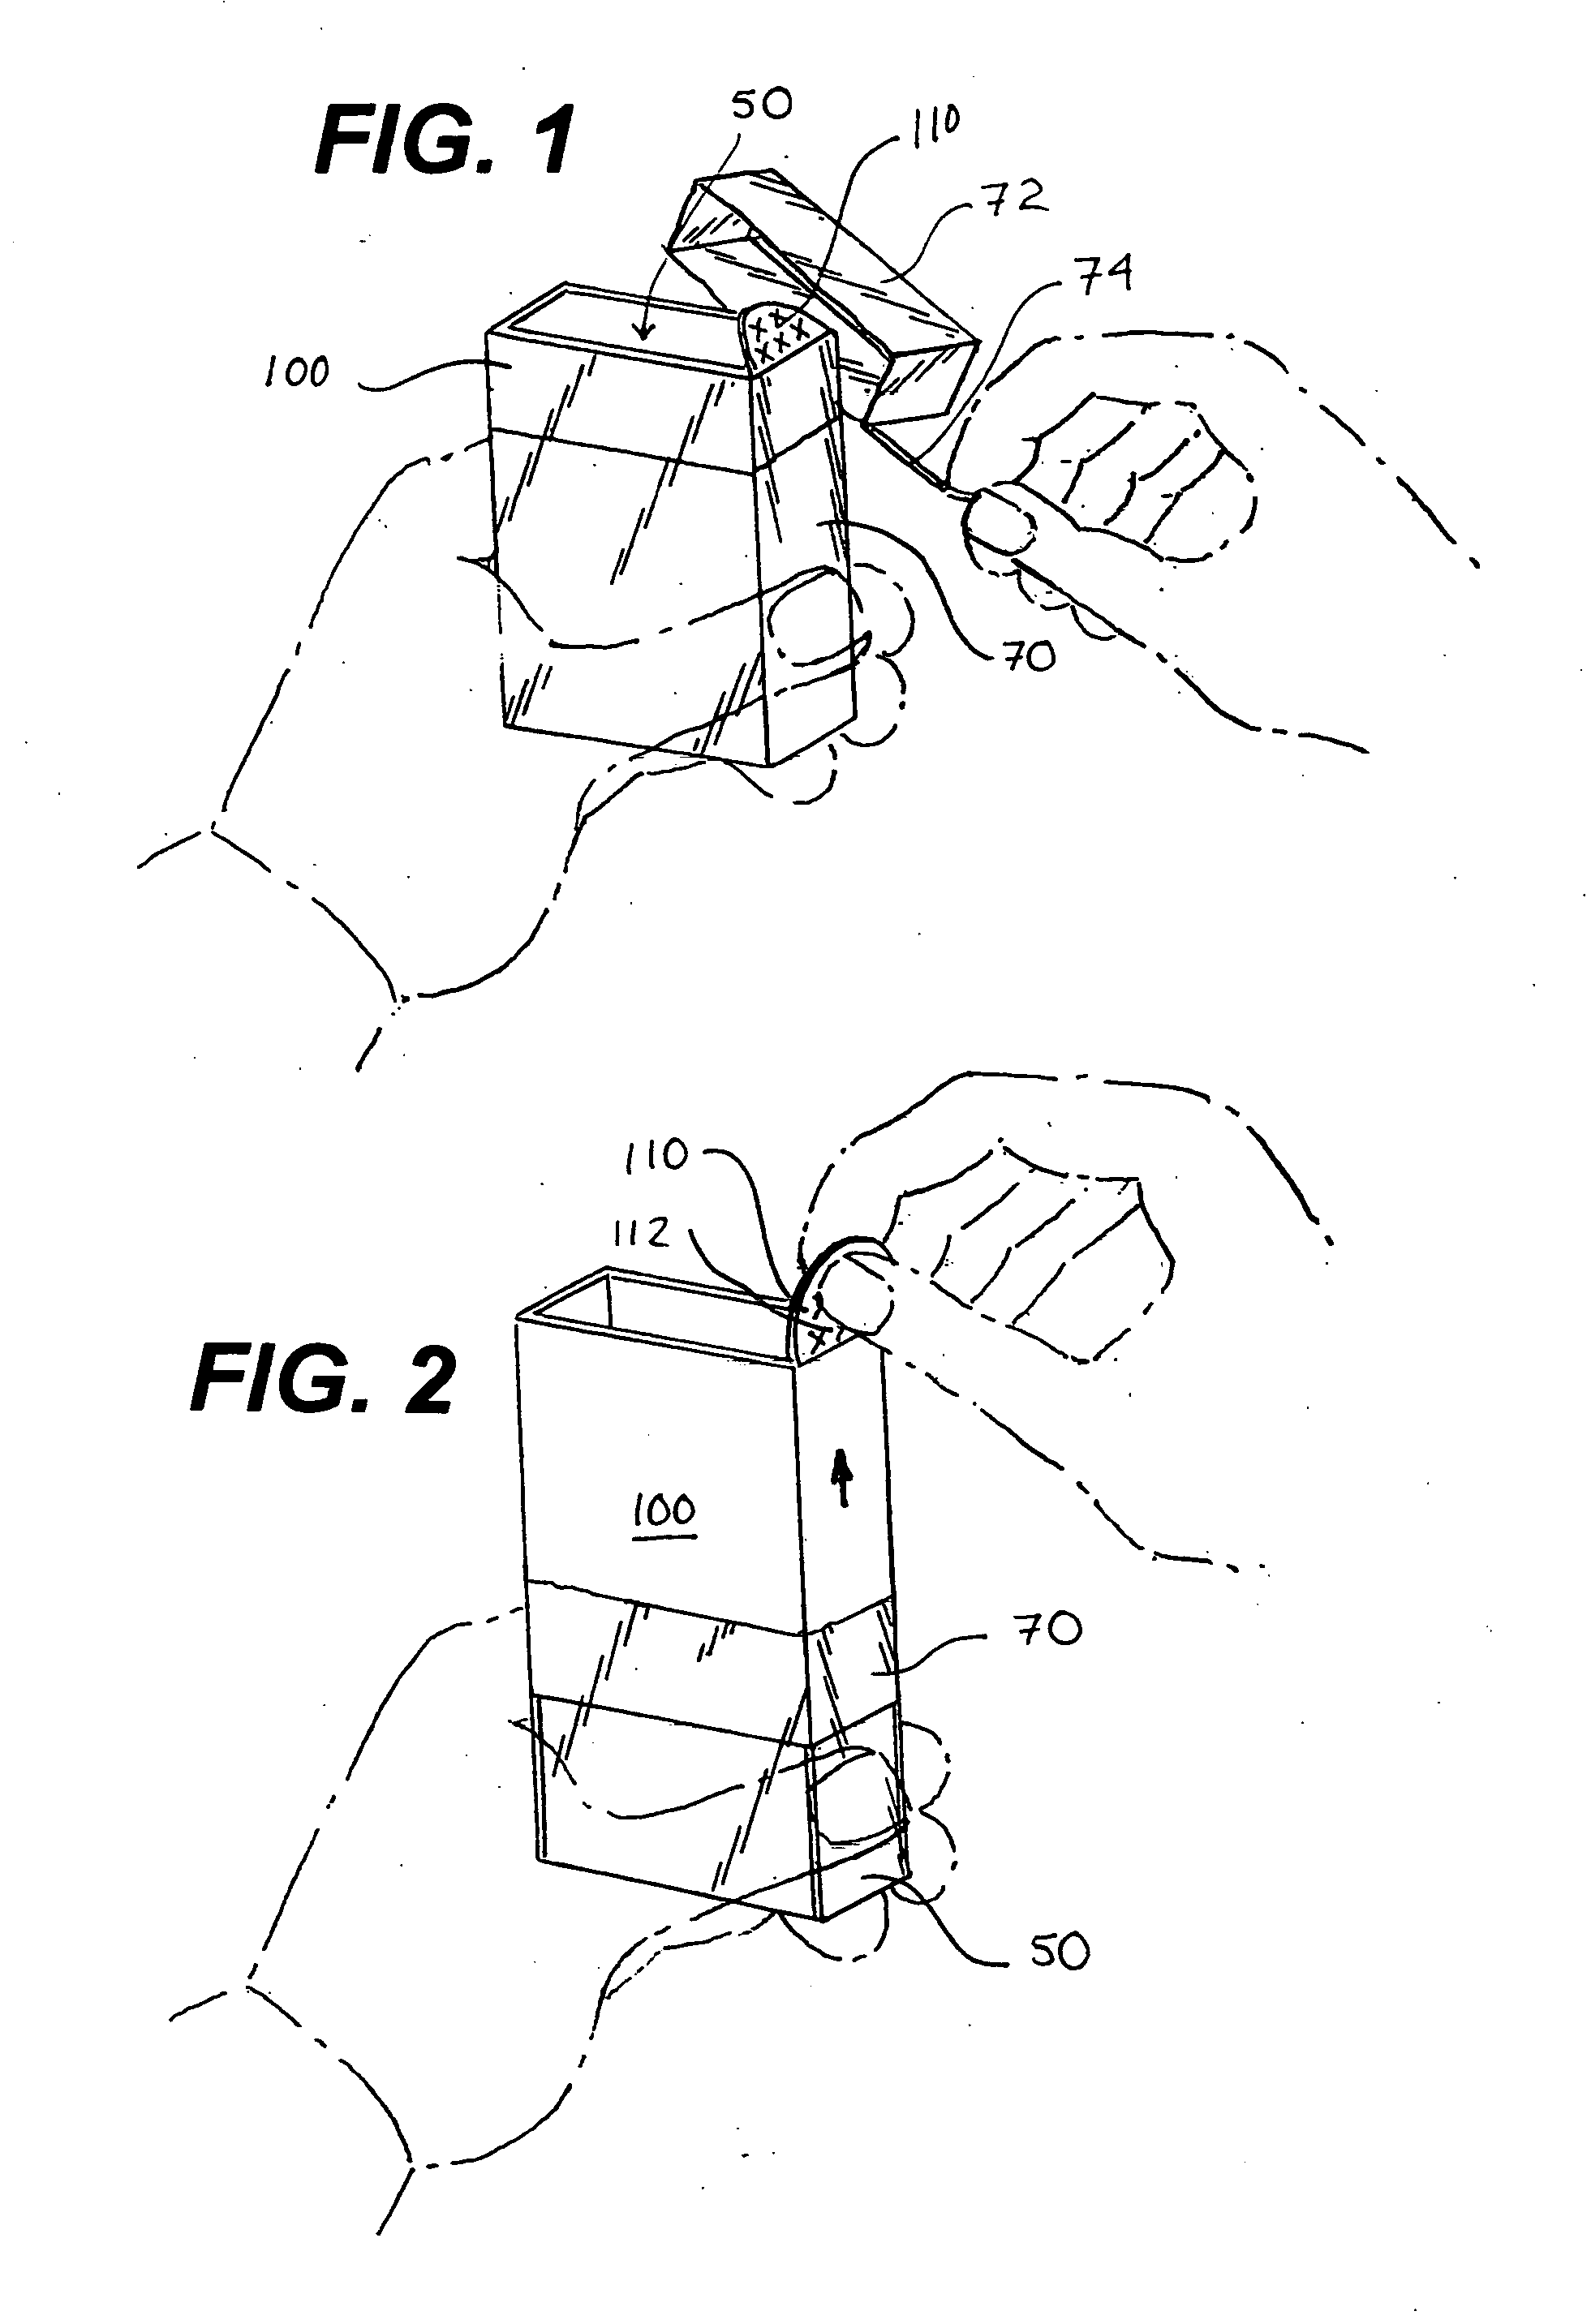 Sleeve for packages and methods of making thereof